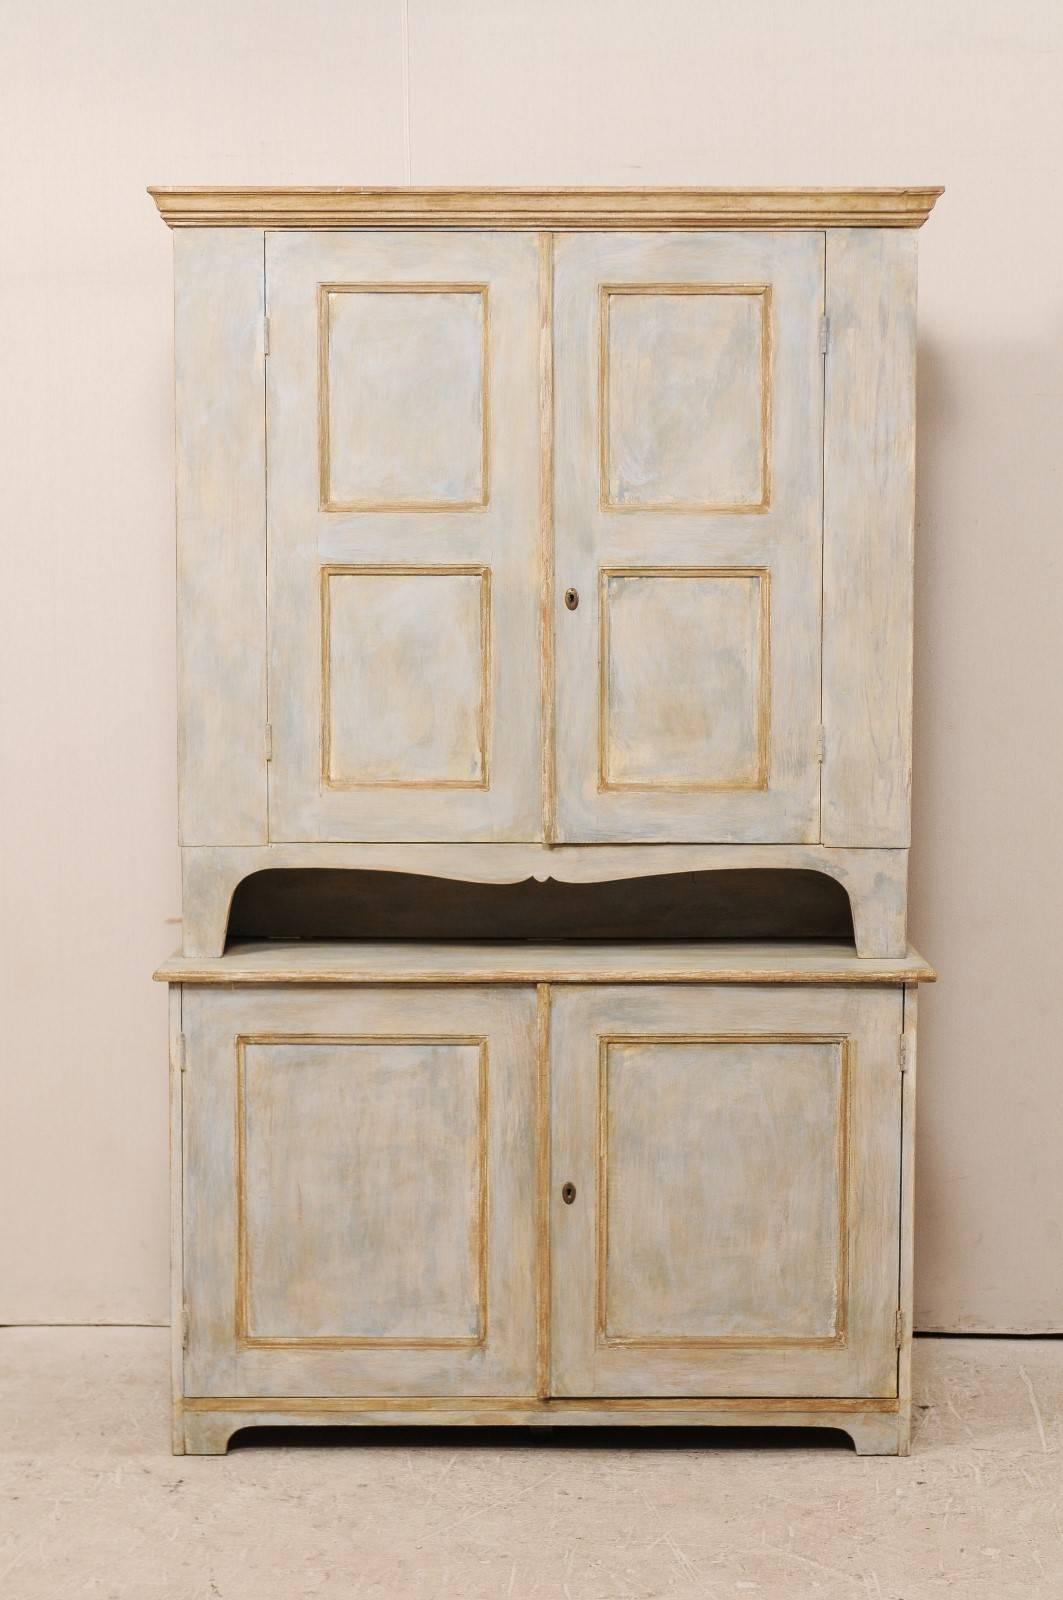 A Swedish mid-19th century painted wood cabinet. This Swedish cupboard features two recessed paneled doors, over the bottom case with two additional recessed paneled doors. There is an open and gently swagged section which separates the top from the